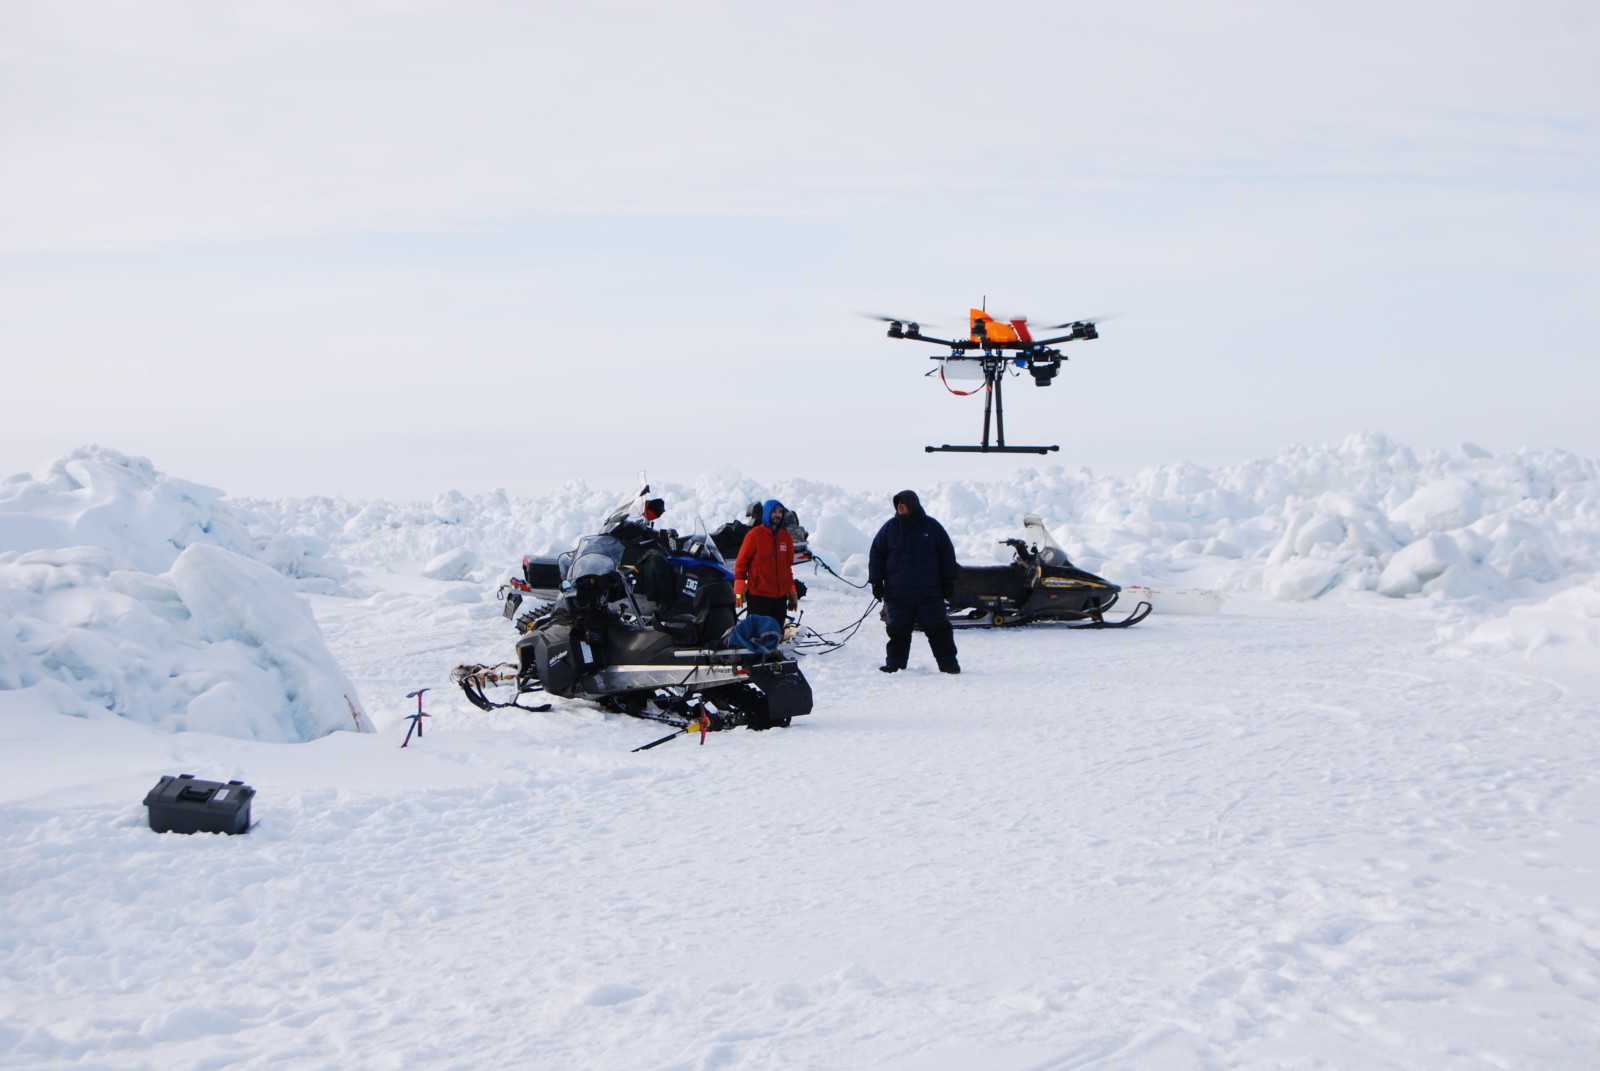 A drone is lifting up in front of people and snow machines in a wide snow landscape